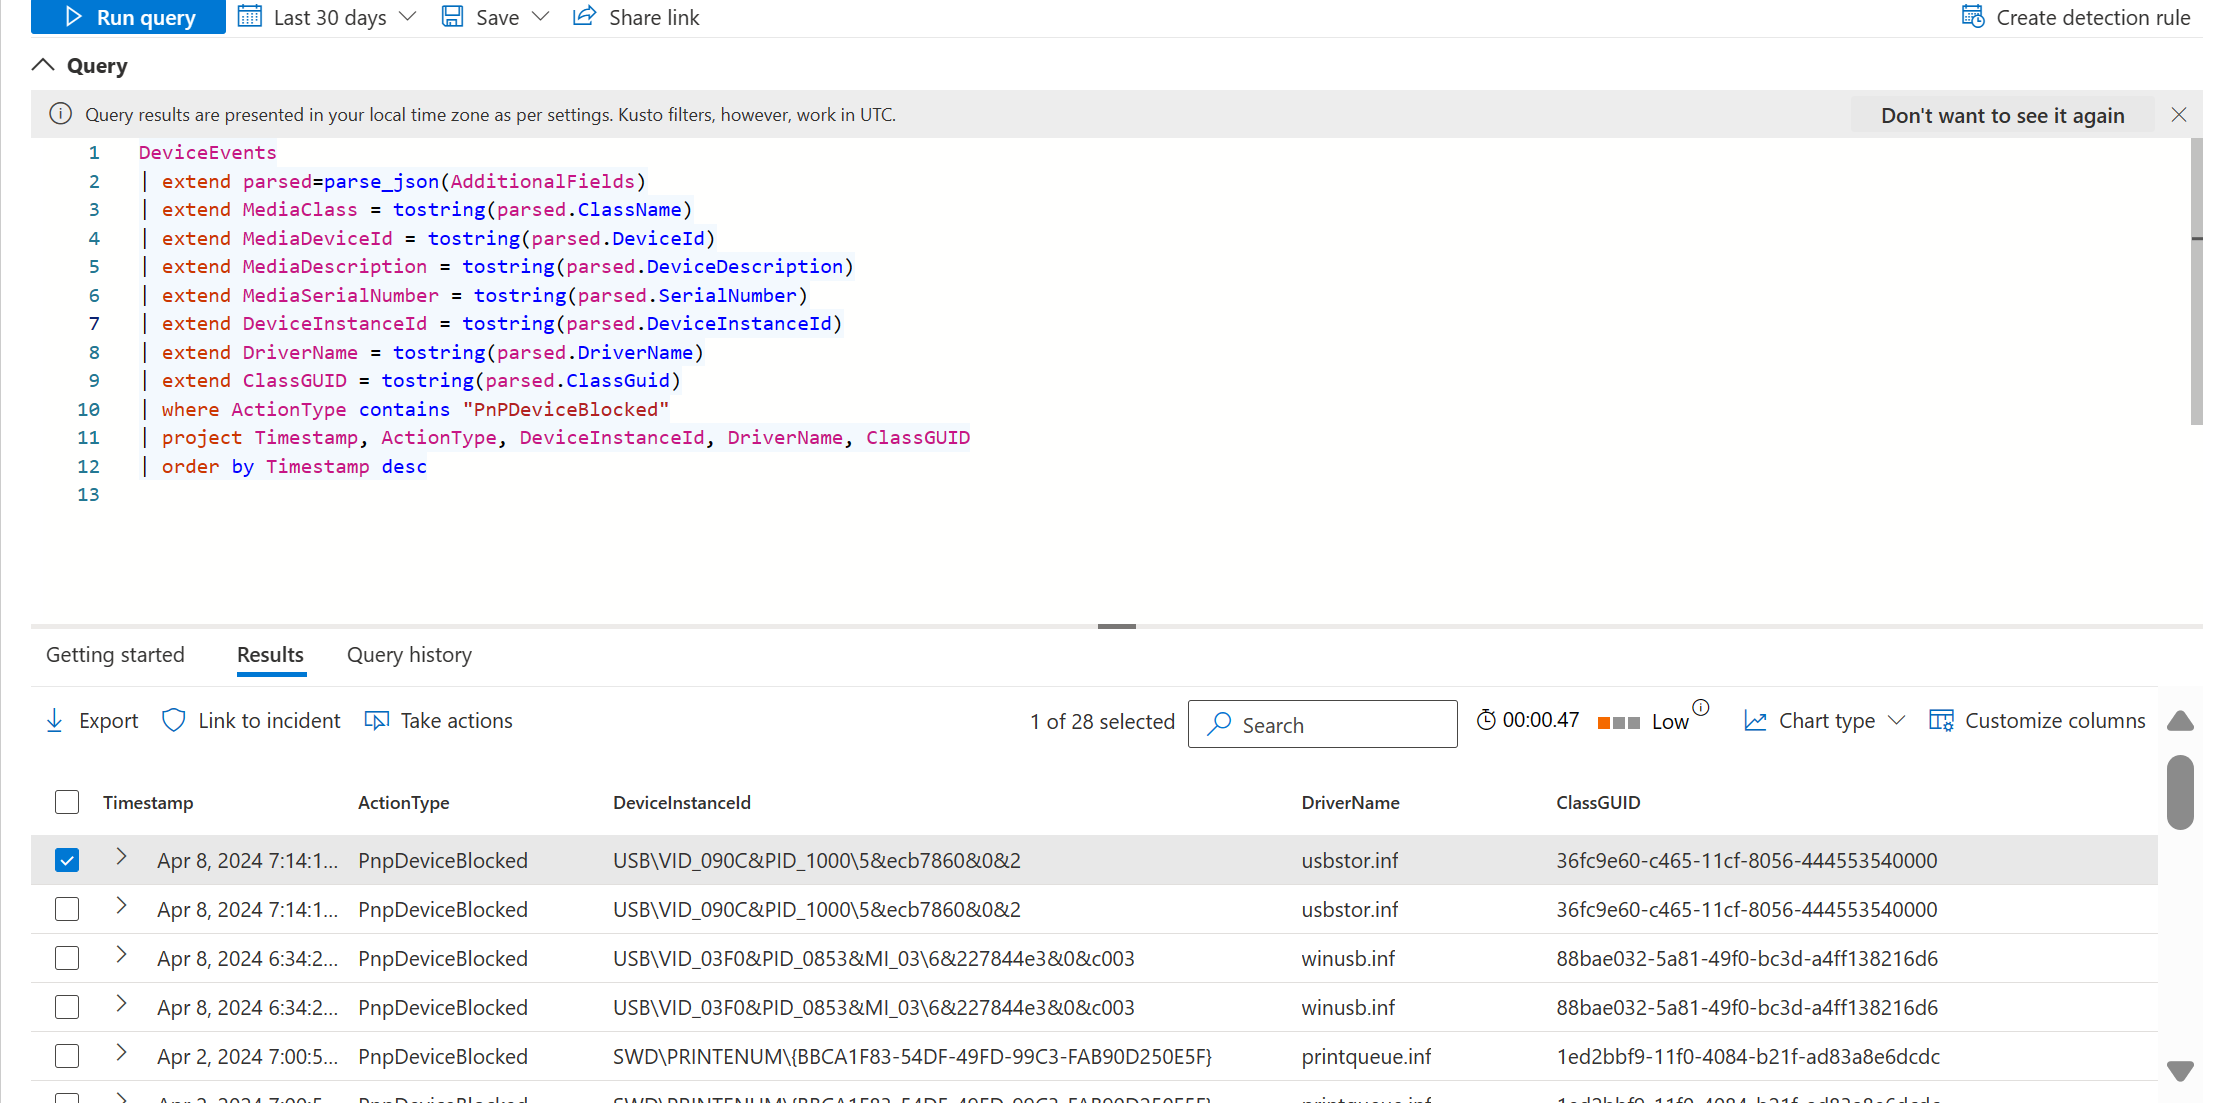 Screenshot showing a DeviceEvents query.